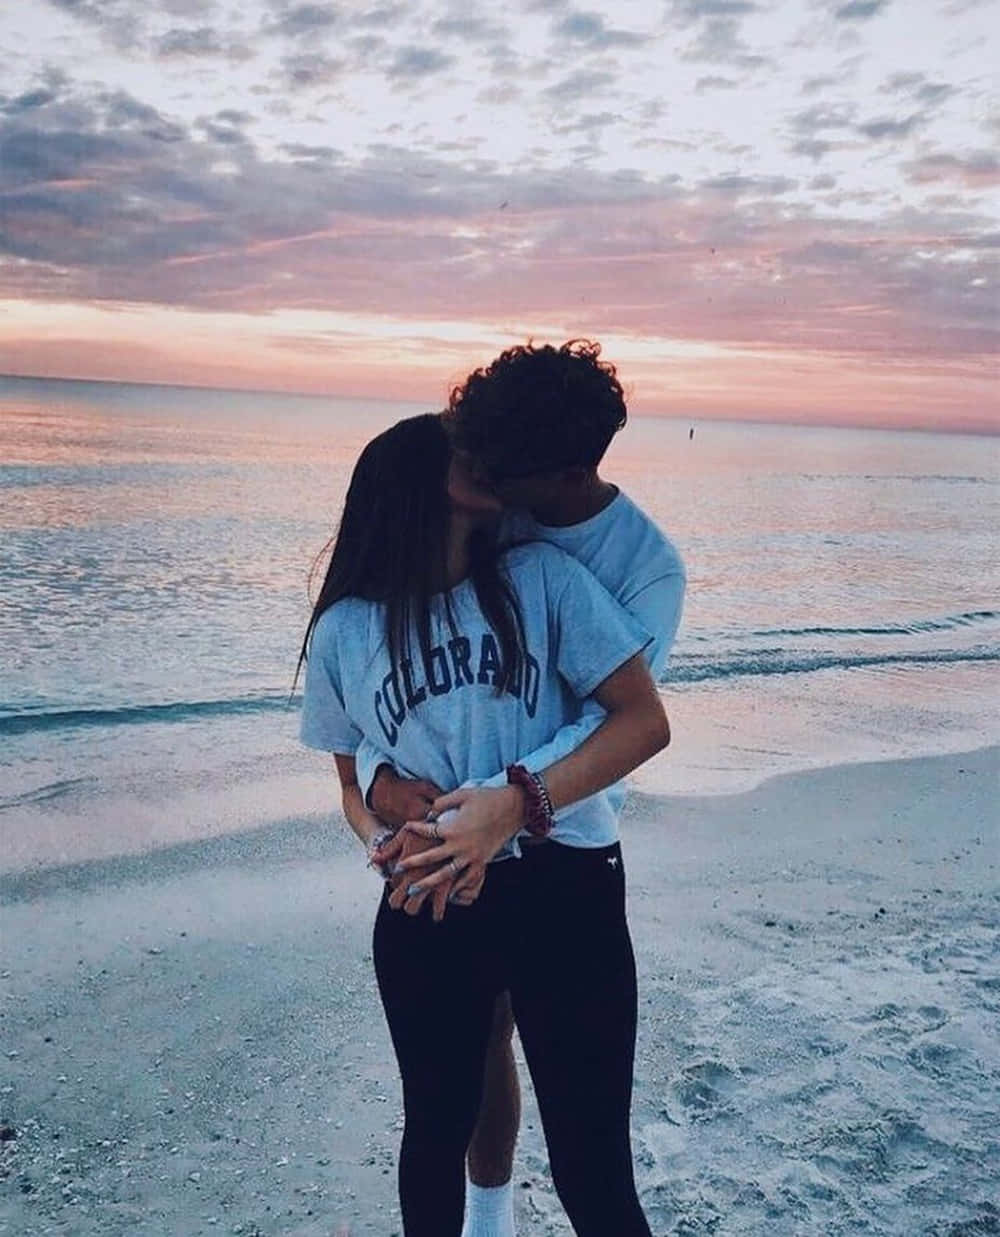 100+] Cute Aesthetic Couple Pictures